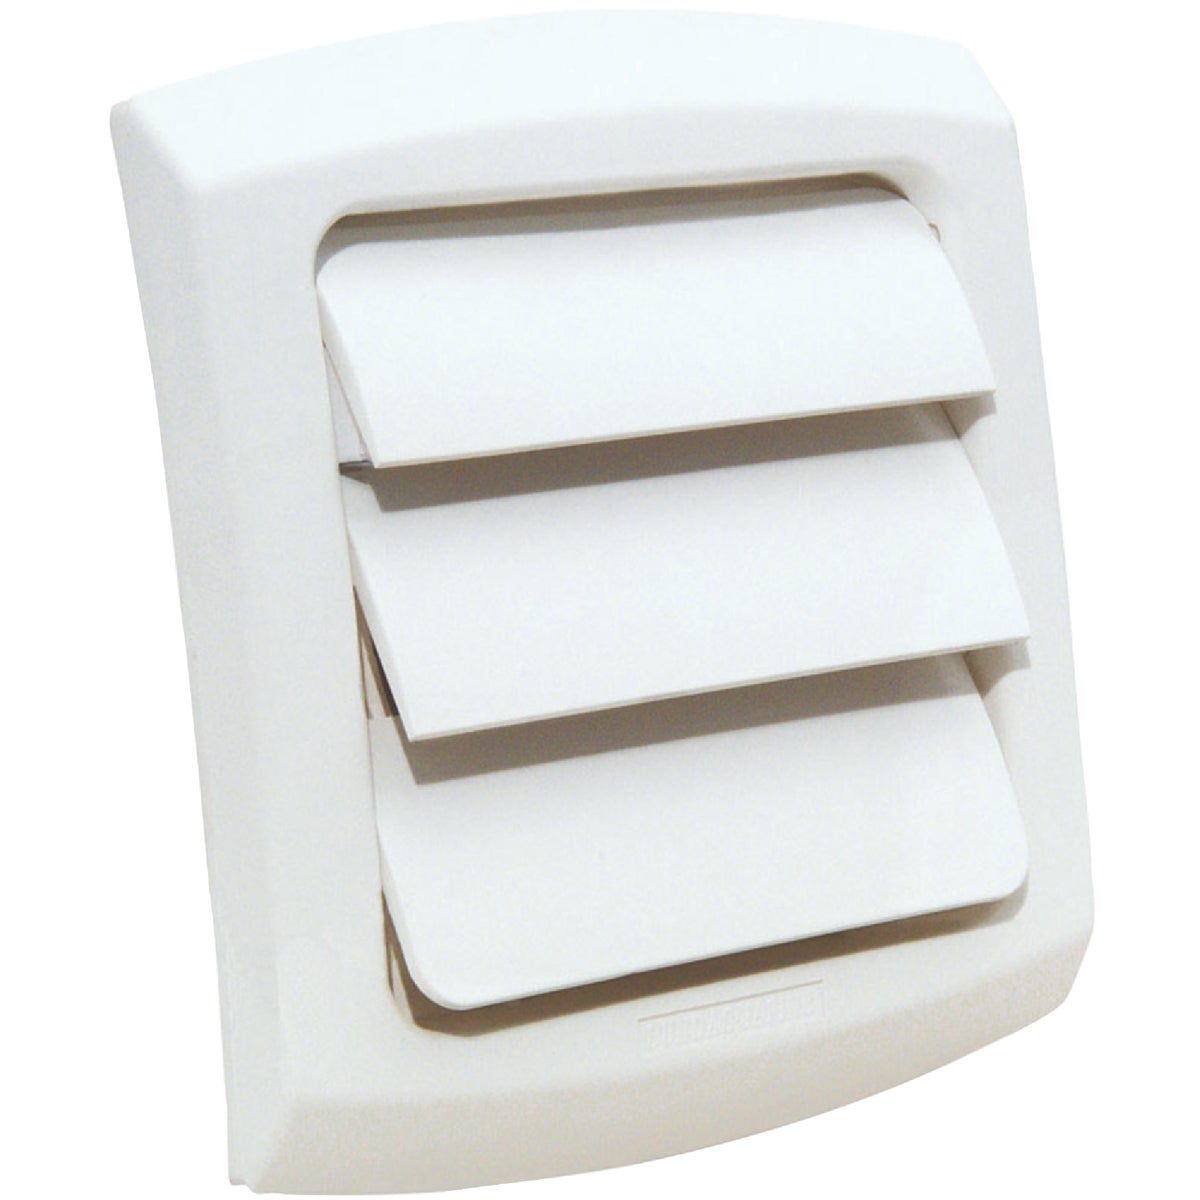 Item 273465, The Imperial 4" louvered vent cap is designed with a low profile flush 